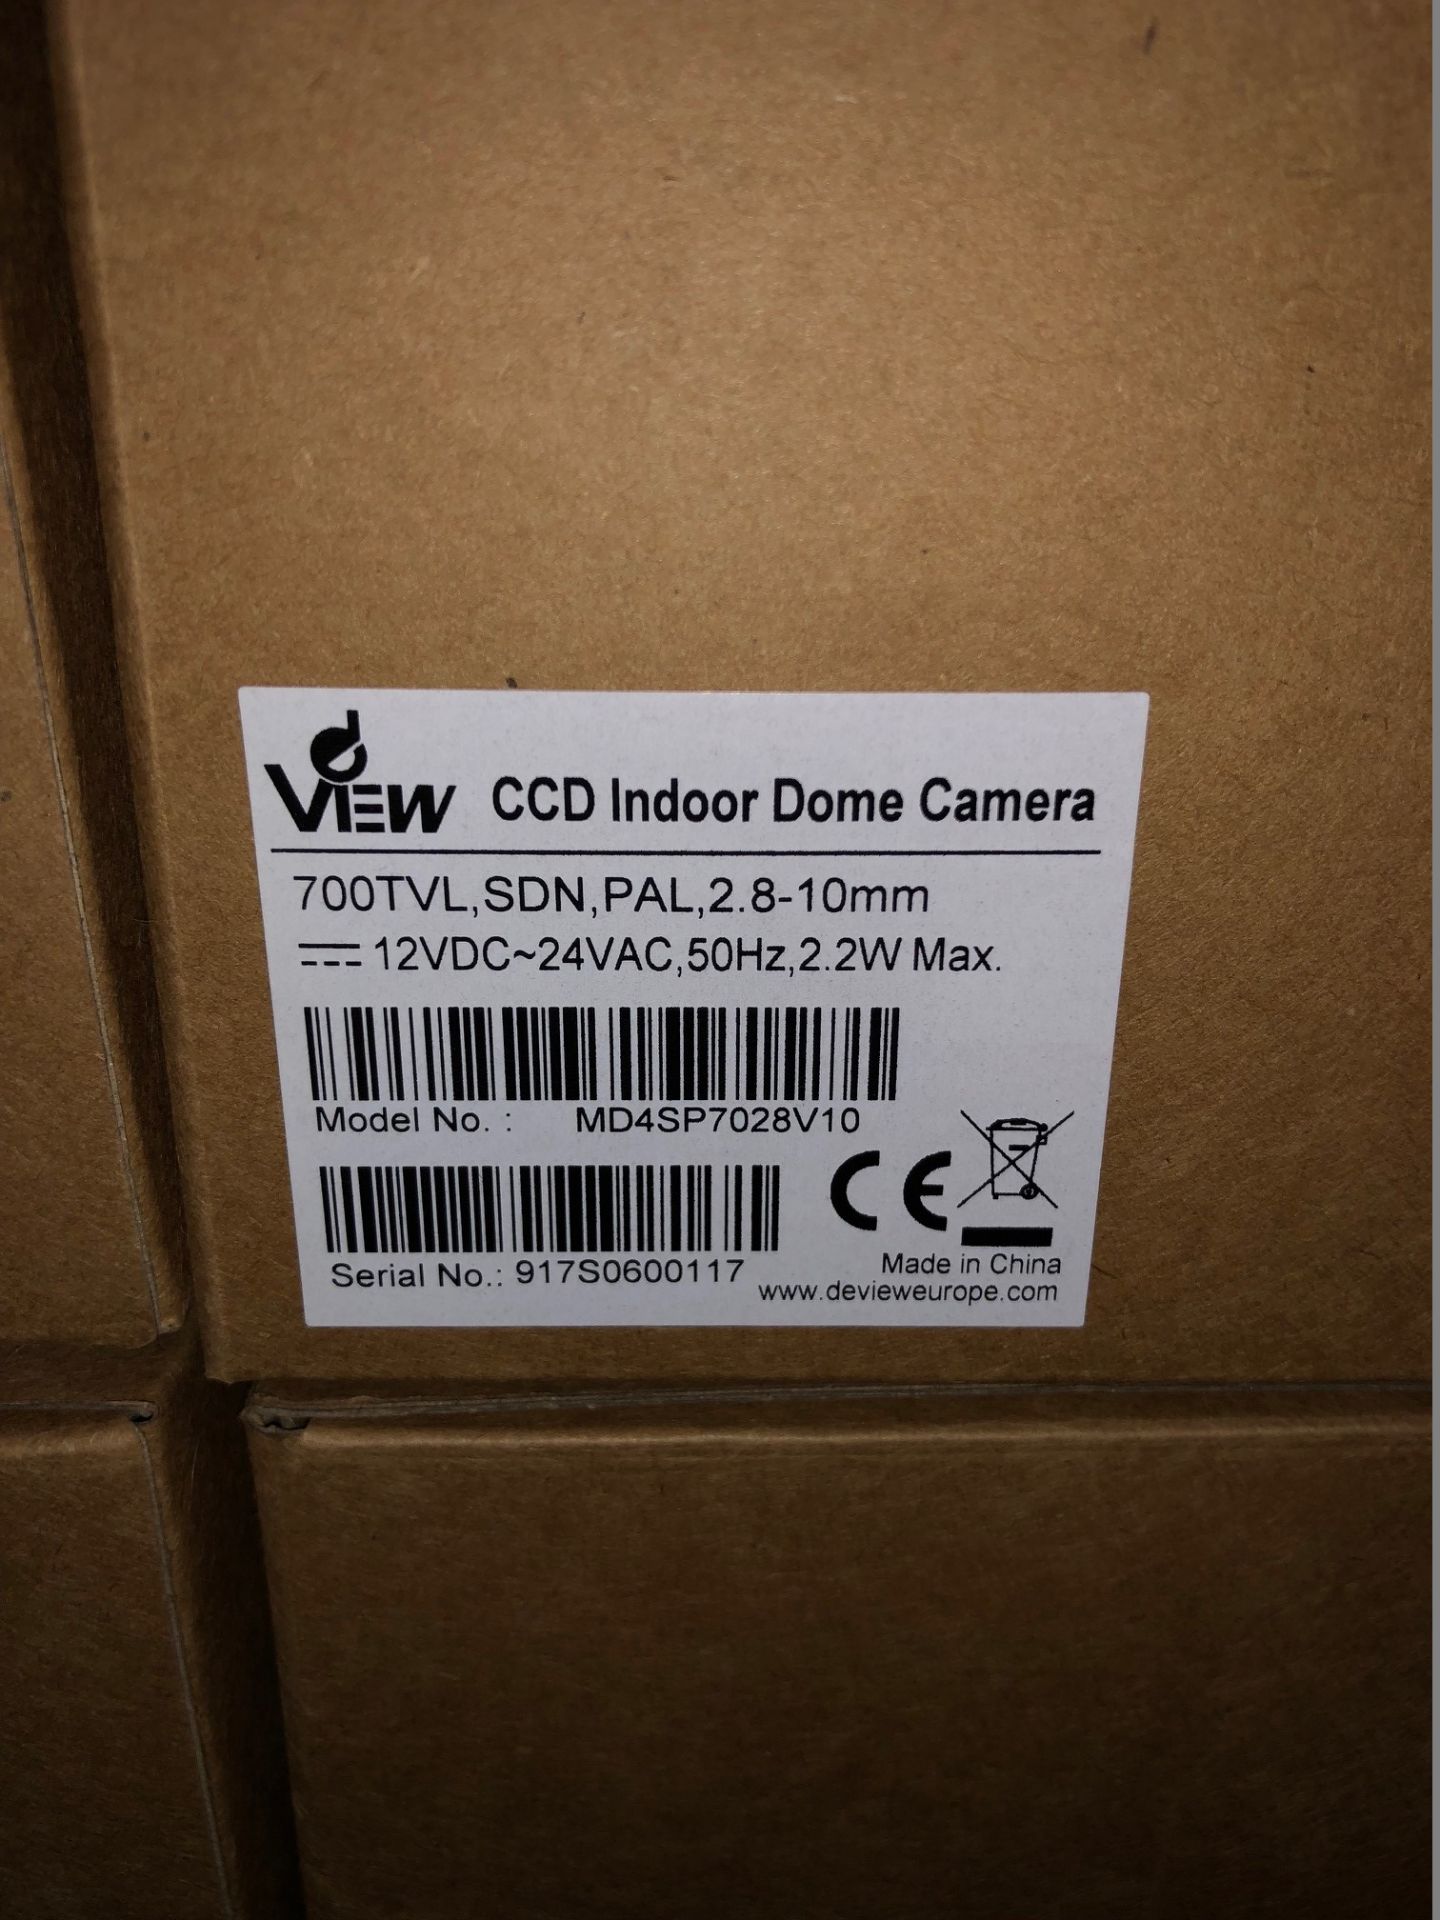 4 x dView CCD Indoor Dome Cameras - 700TVL, SDN, PAL, 2.8-10mm - Model MD4SP7028V10 (Brand New & - Image 2 of 3